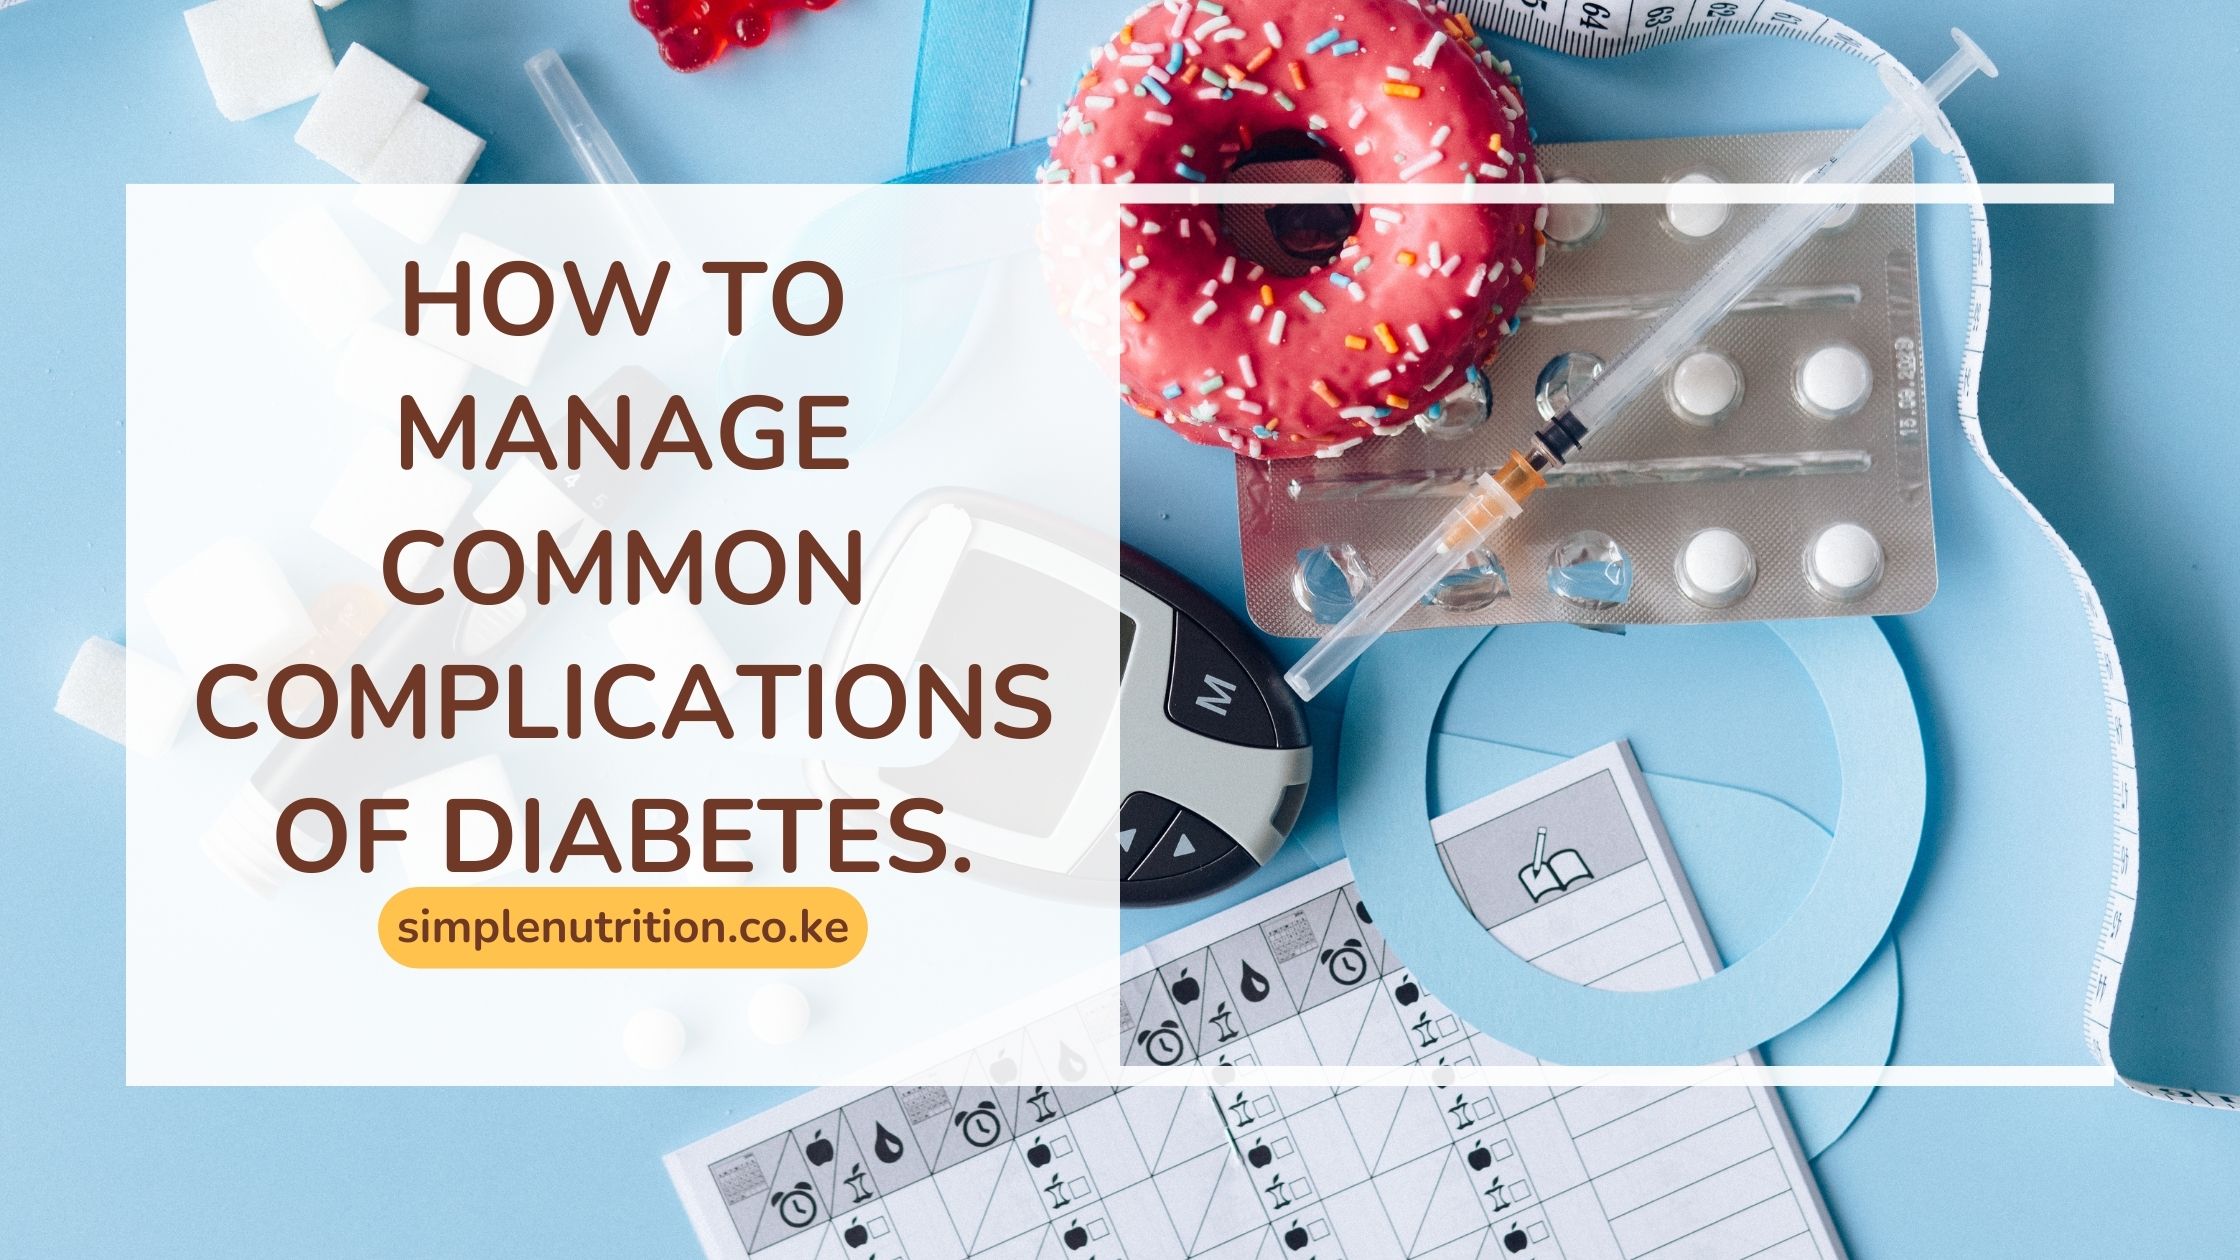 How to Manage Common Complications of Diabetes.